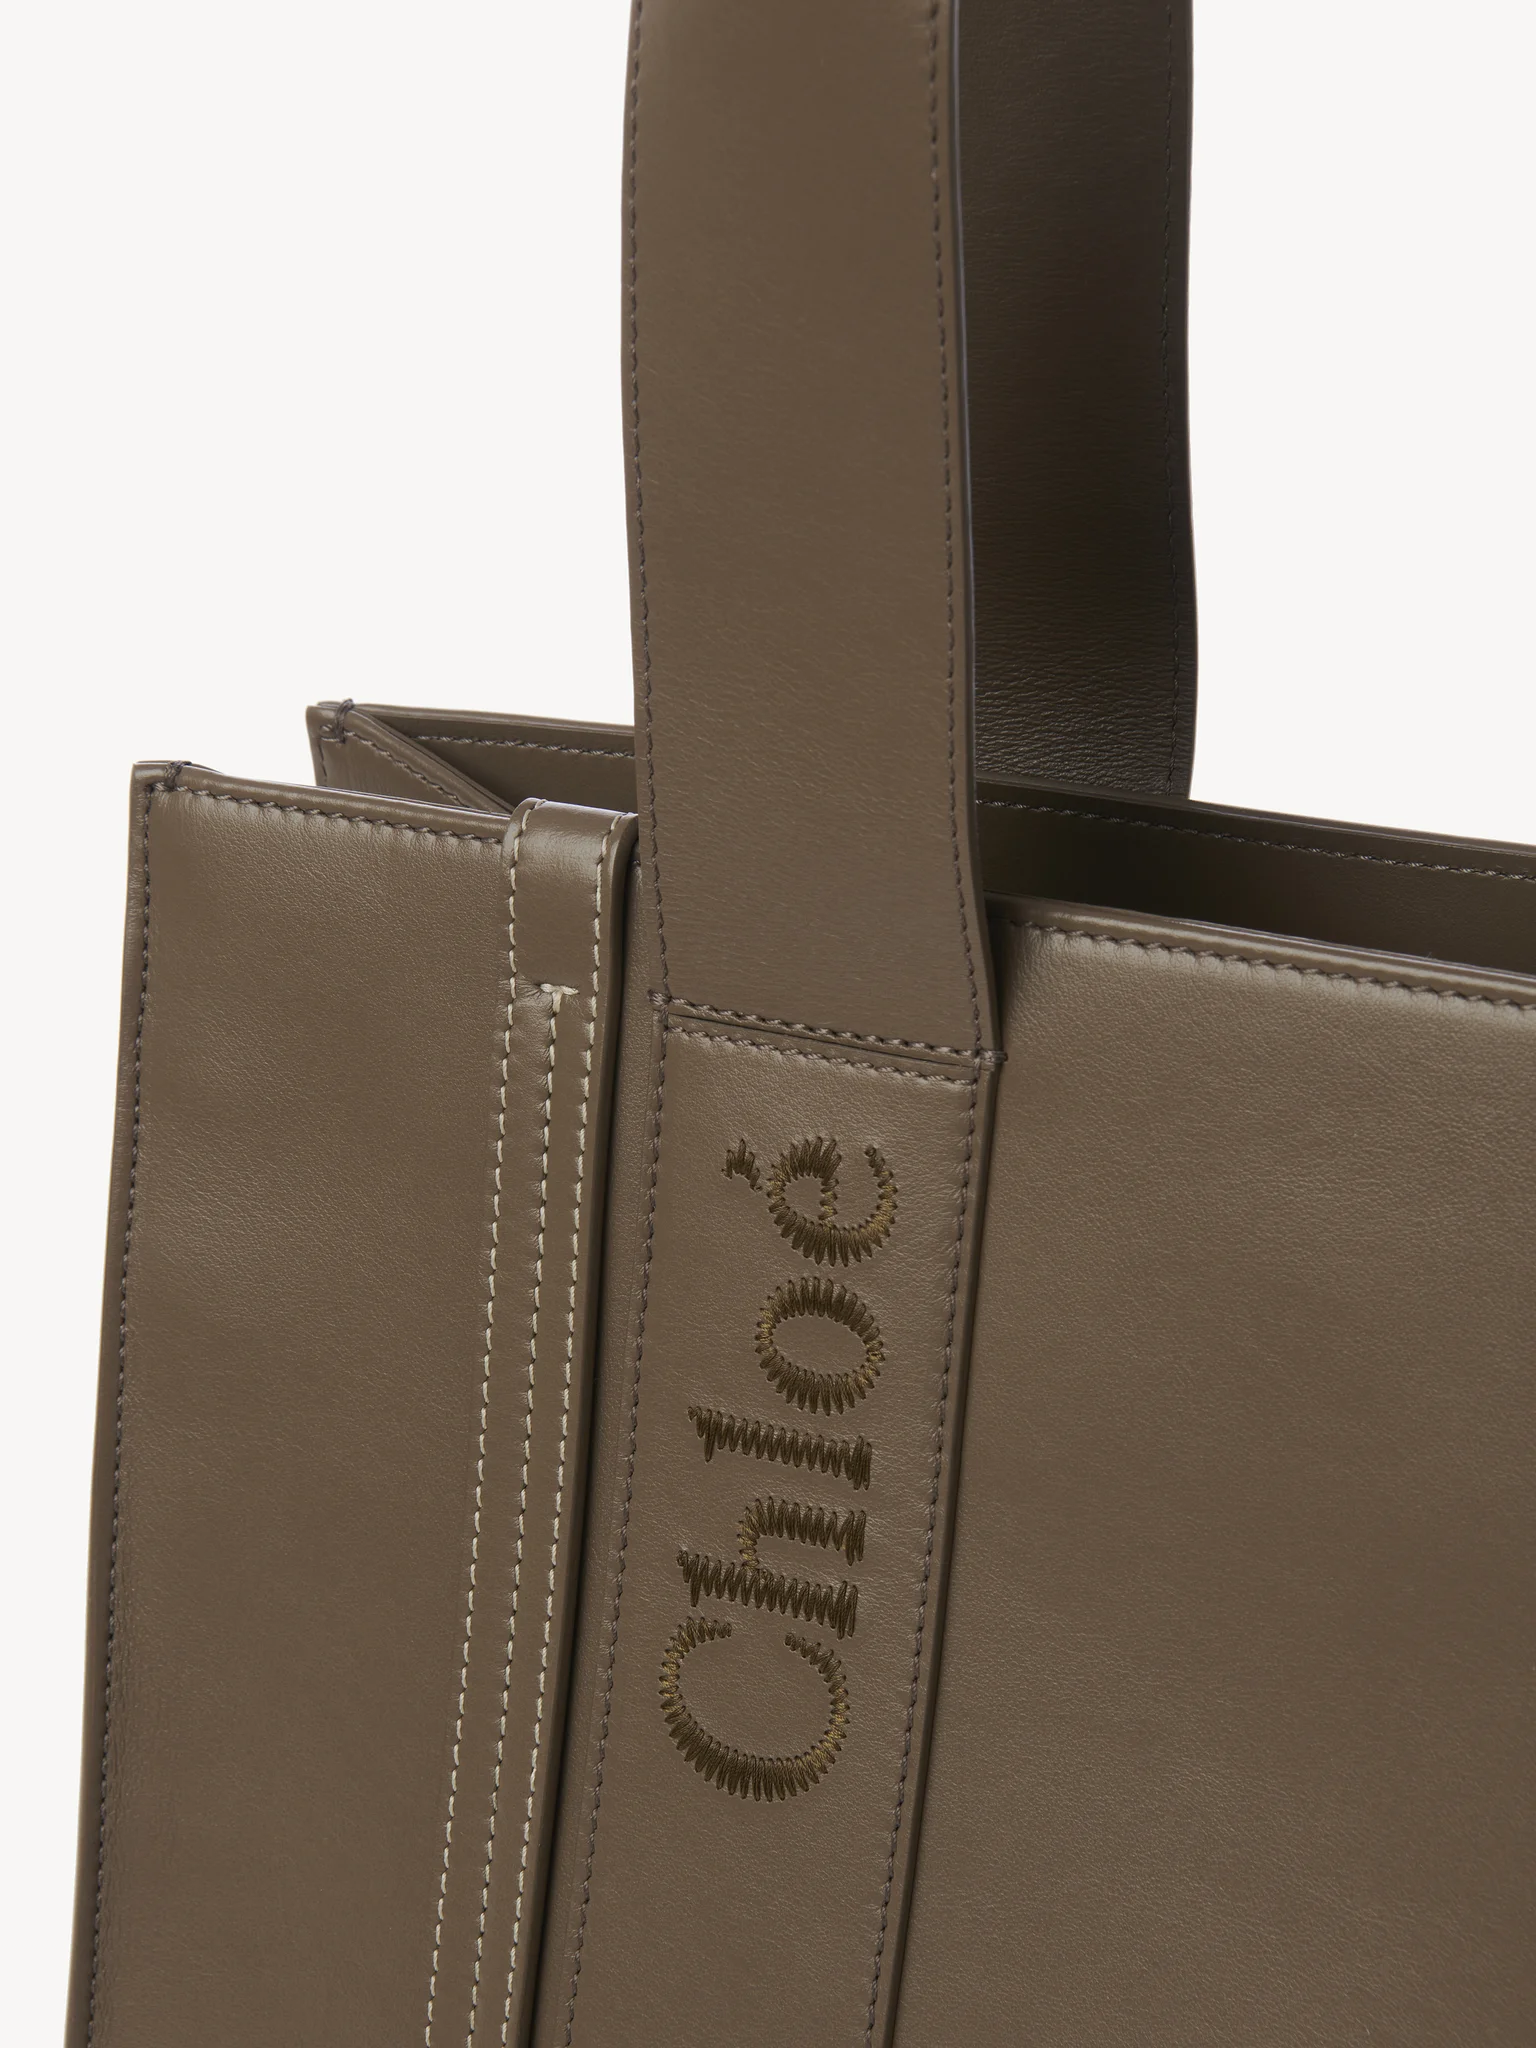 Chloe Woody Medium Leather Tote in Army Green available at TNT The New Trend Australia.